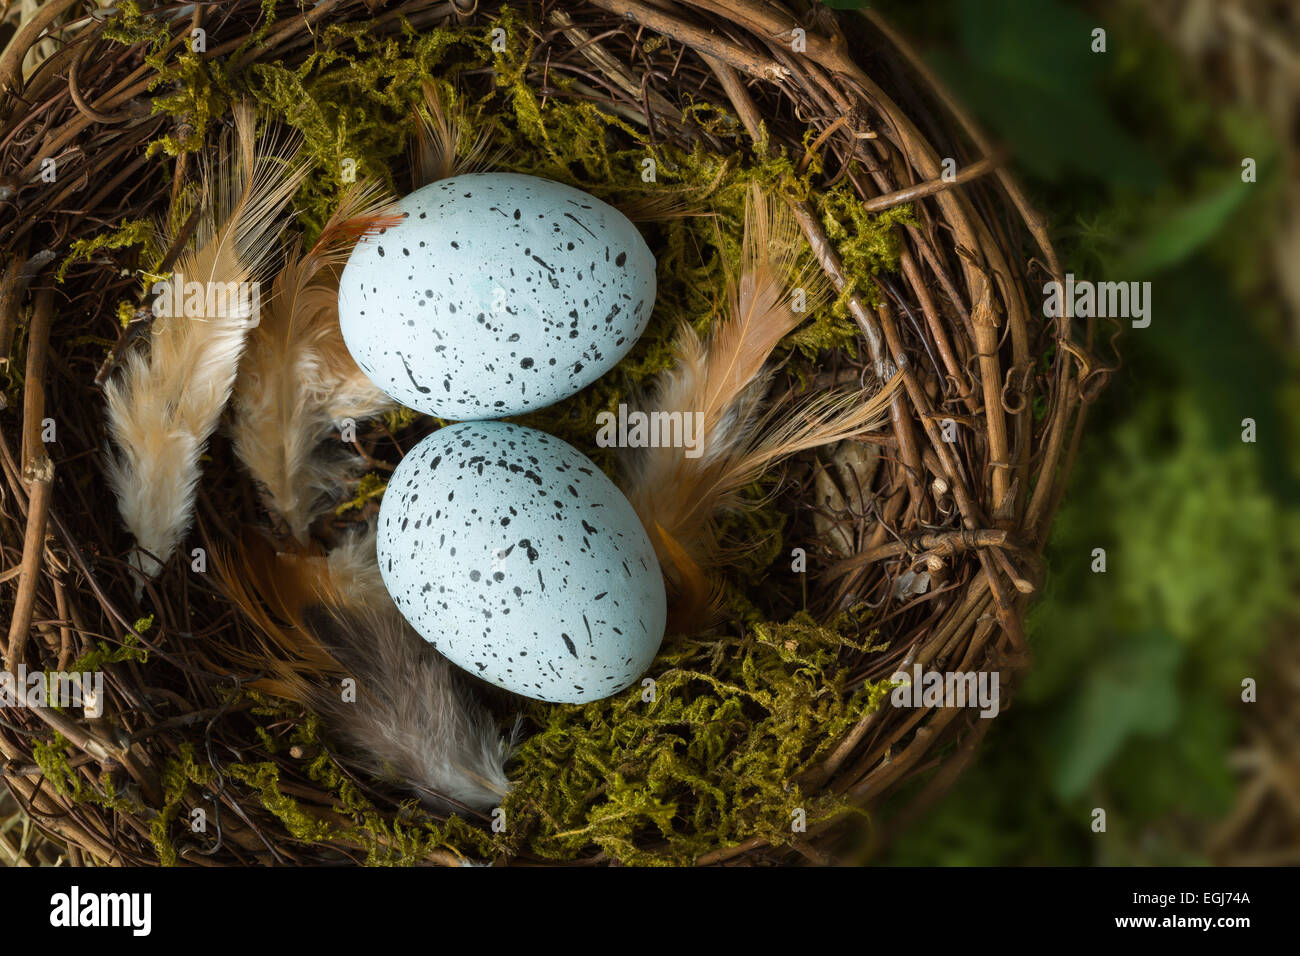 Blue speckled eggs lying in a bird's nest Stock Photo